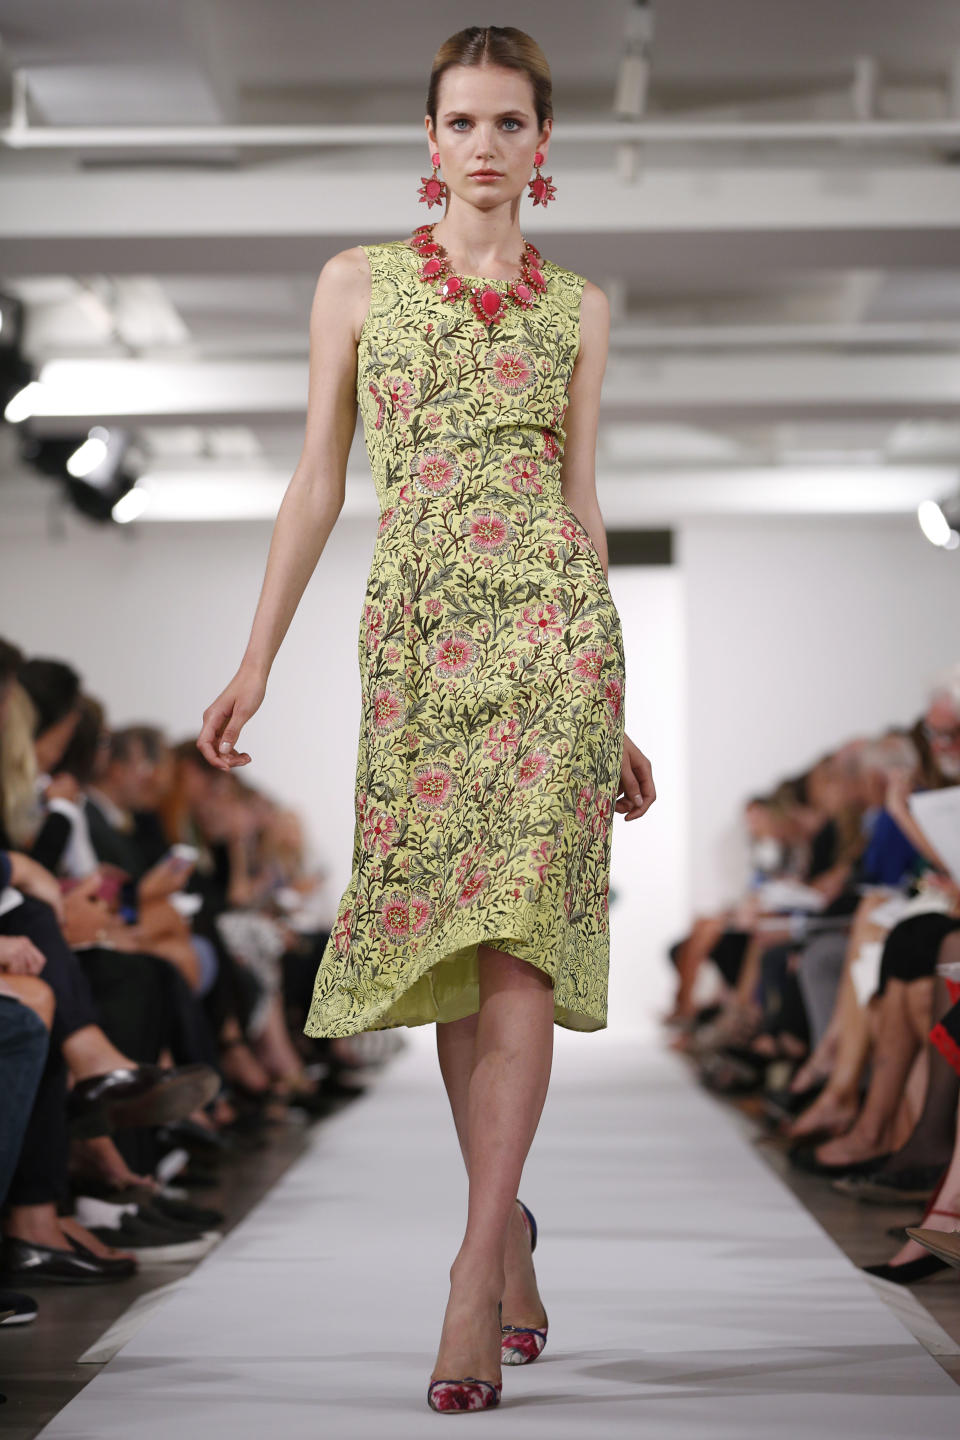 The Oscar de la Renta Spring 2014 collection is modeled during Fashion Week in New York, Tuesday, Sept. 10, 2013. (AP Photo/John Minchillo)